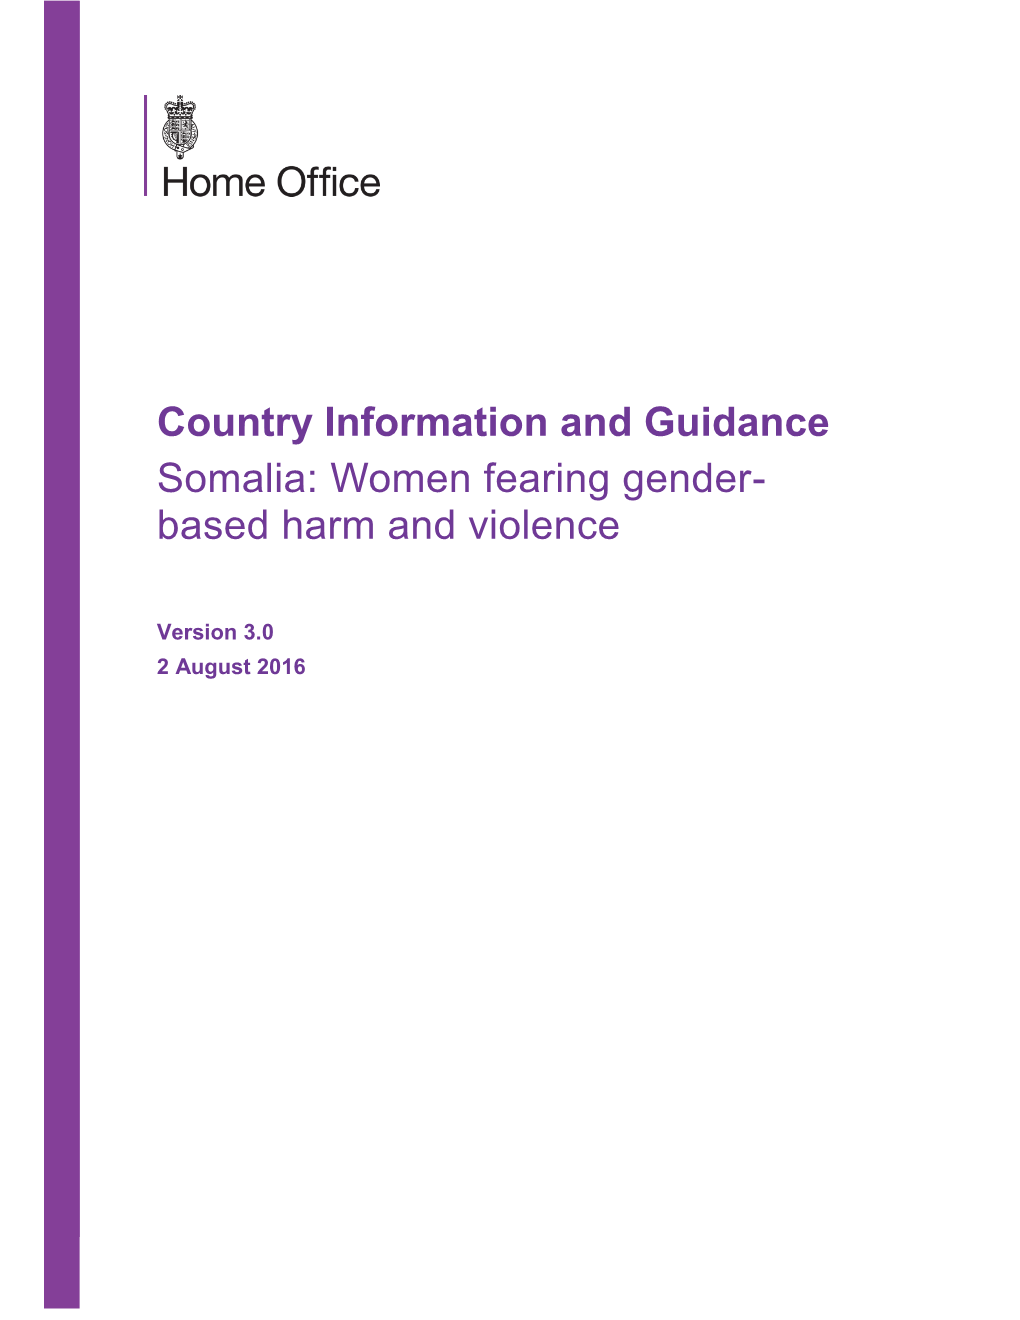 Country Information and Guidance Somalia: Women Fearing Gender- Based Harm and Violence